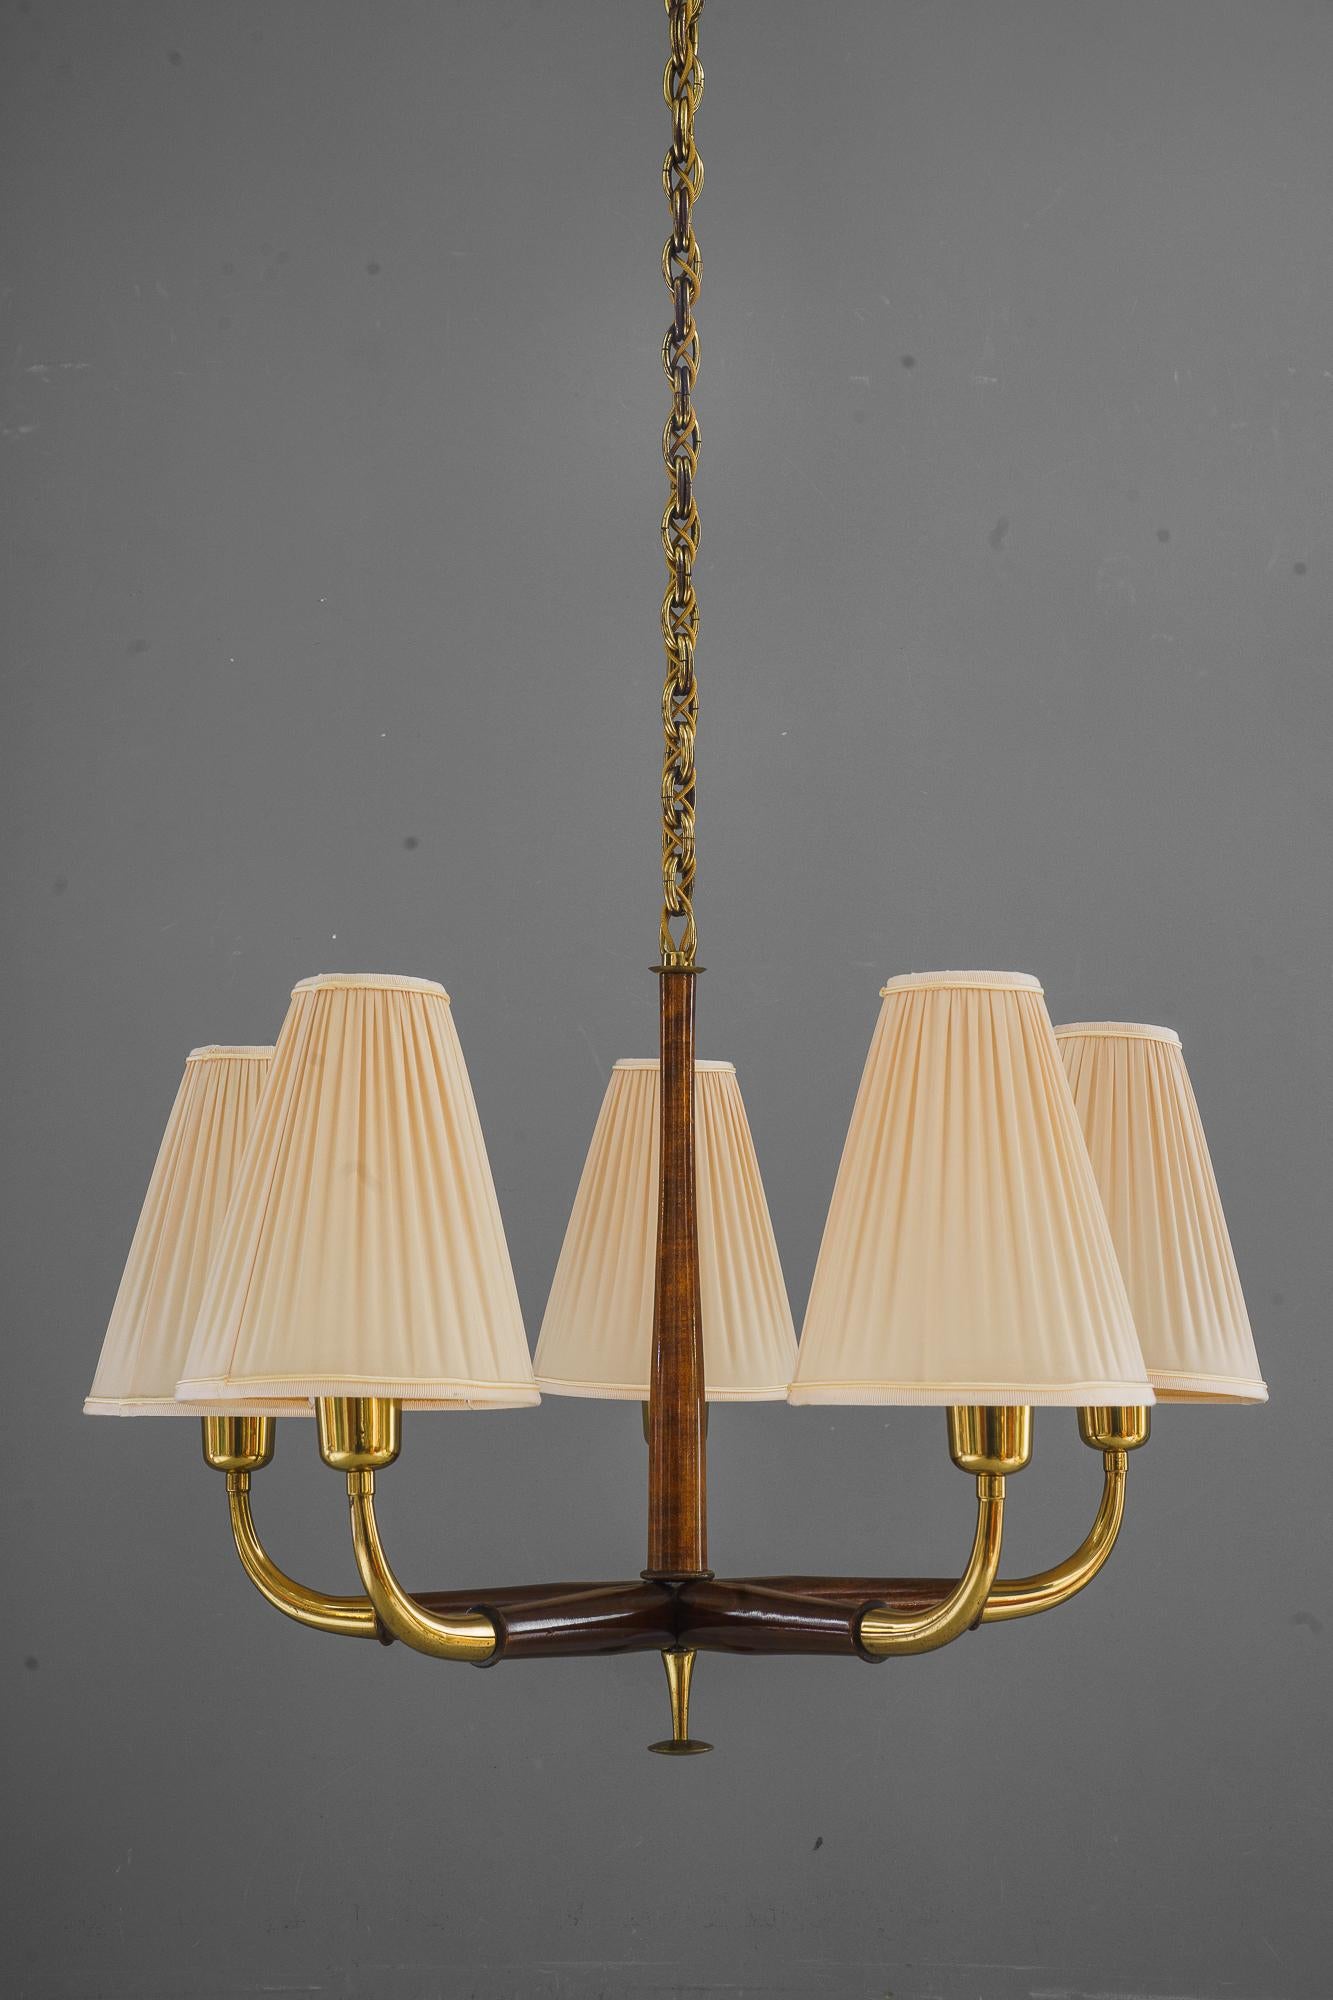 Chandelier by Josef Frank, 1930s with fabric shades
Form construction of beechwood, that has been stained in walnut colour
Original condition
The shades are replaced ( new )